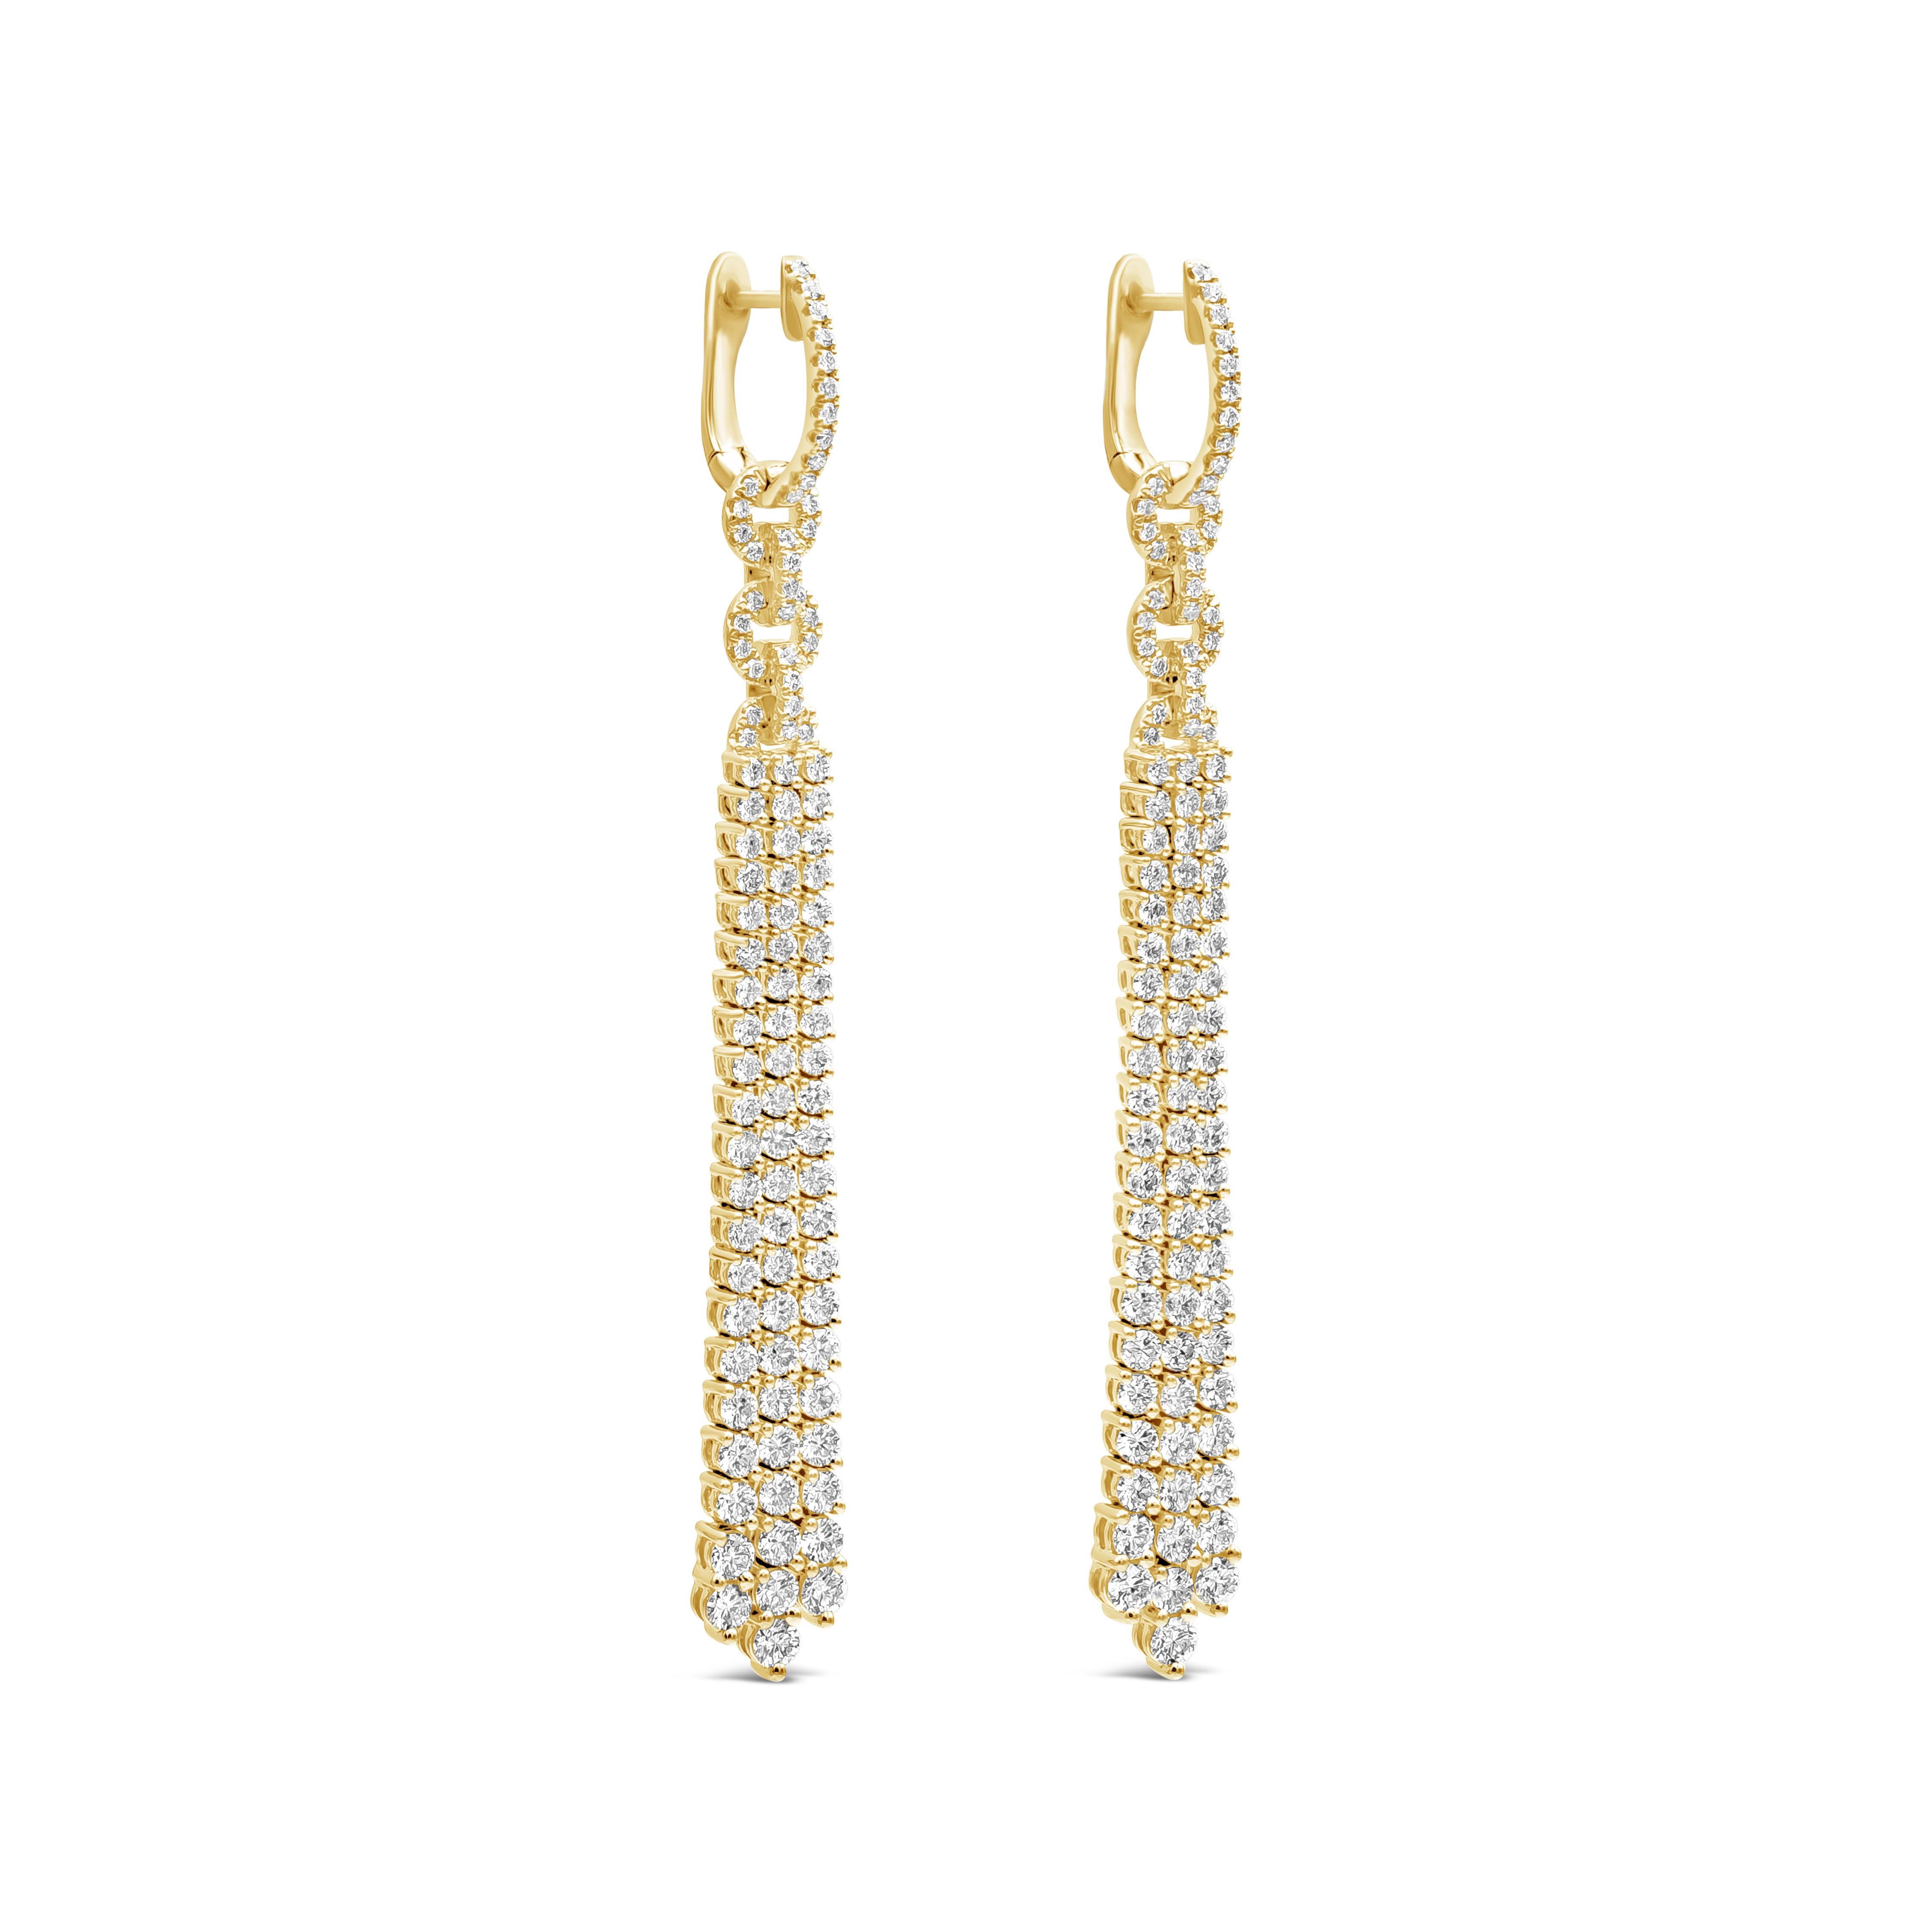 A fashionable and sophisticated piece of jewelry. Each earring showcases three strand round diamonds in yellow gold that elegantly dangled. Diamonds weigh 4.35 carats in total approximately F-G color, VS-SI in clarity. Finely made in 18k yellow